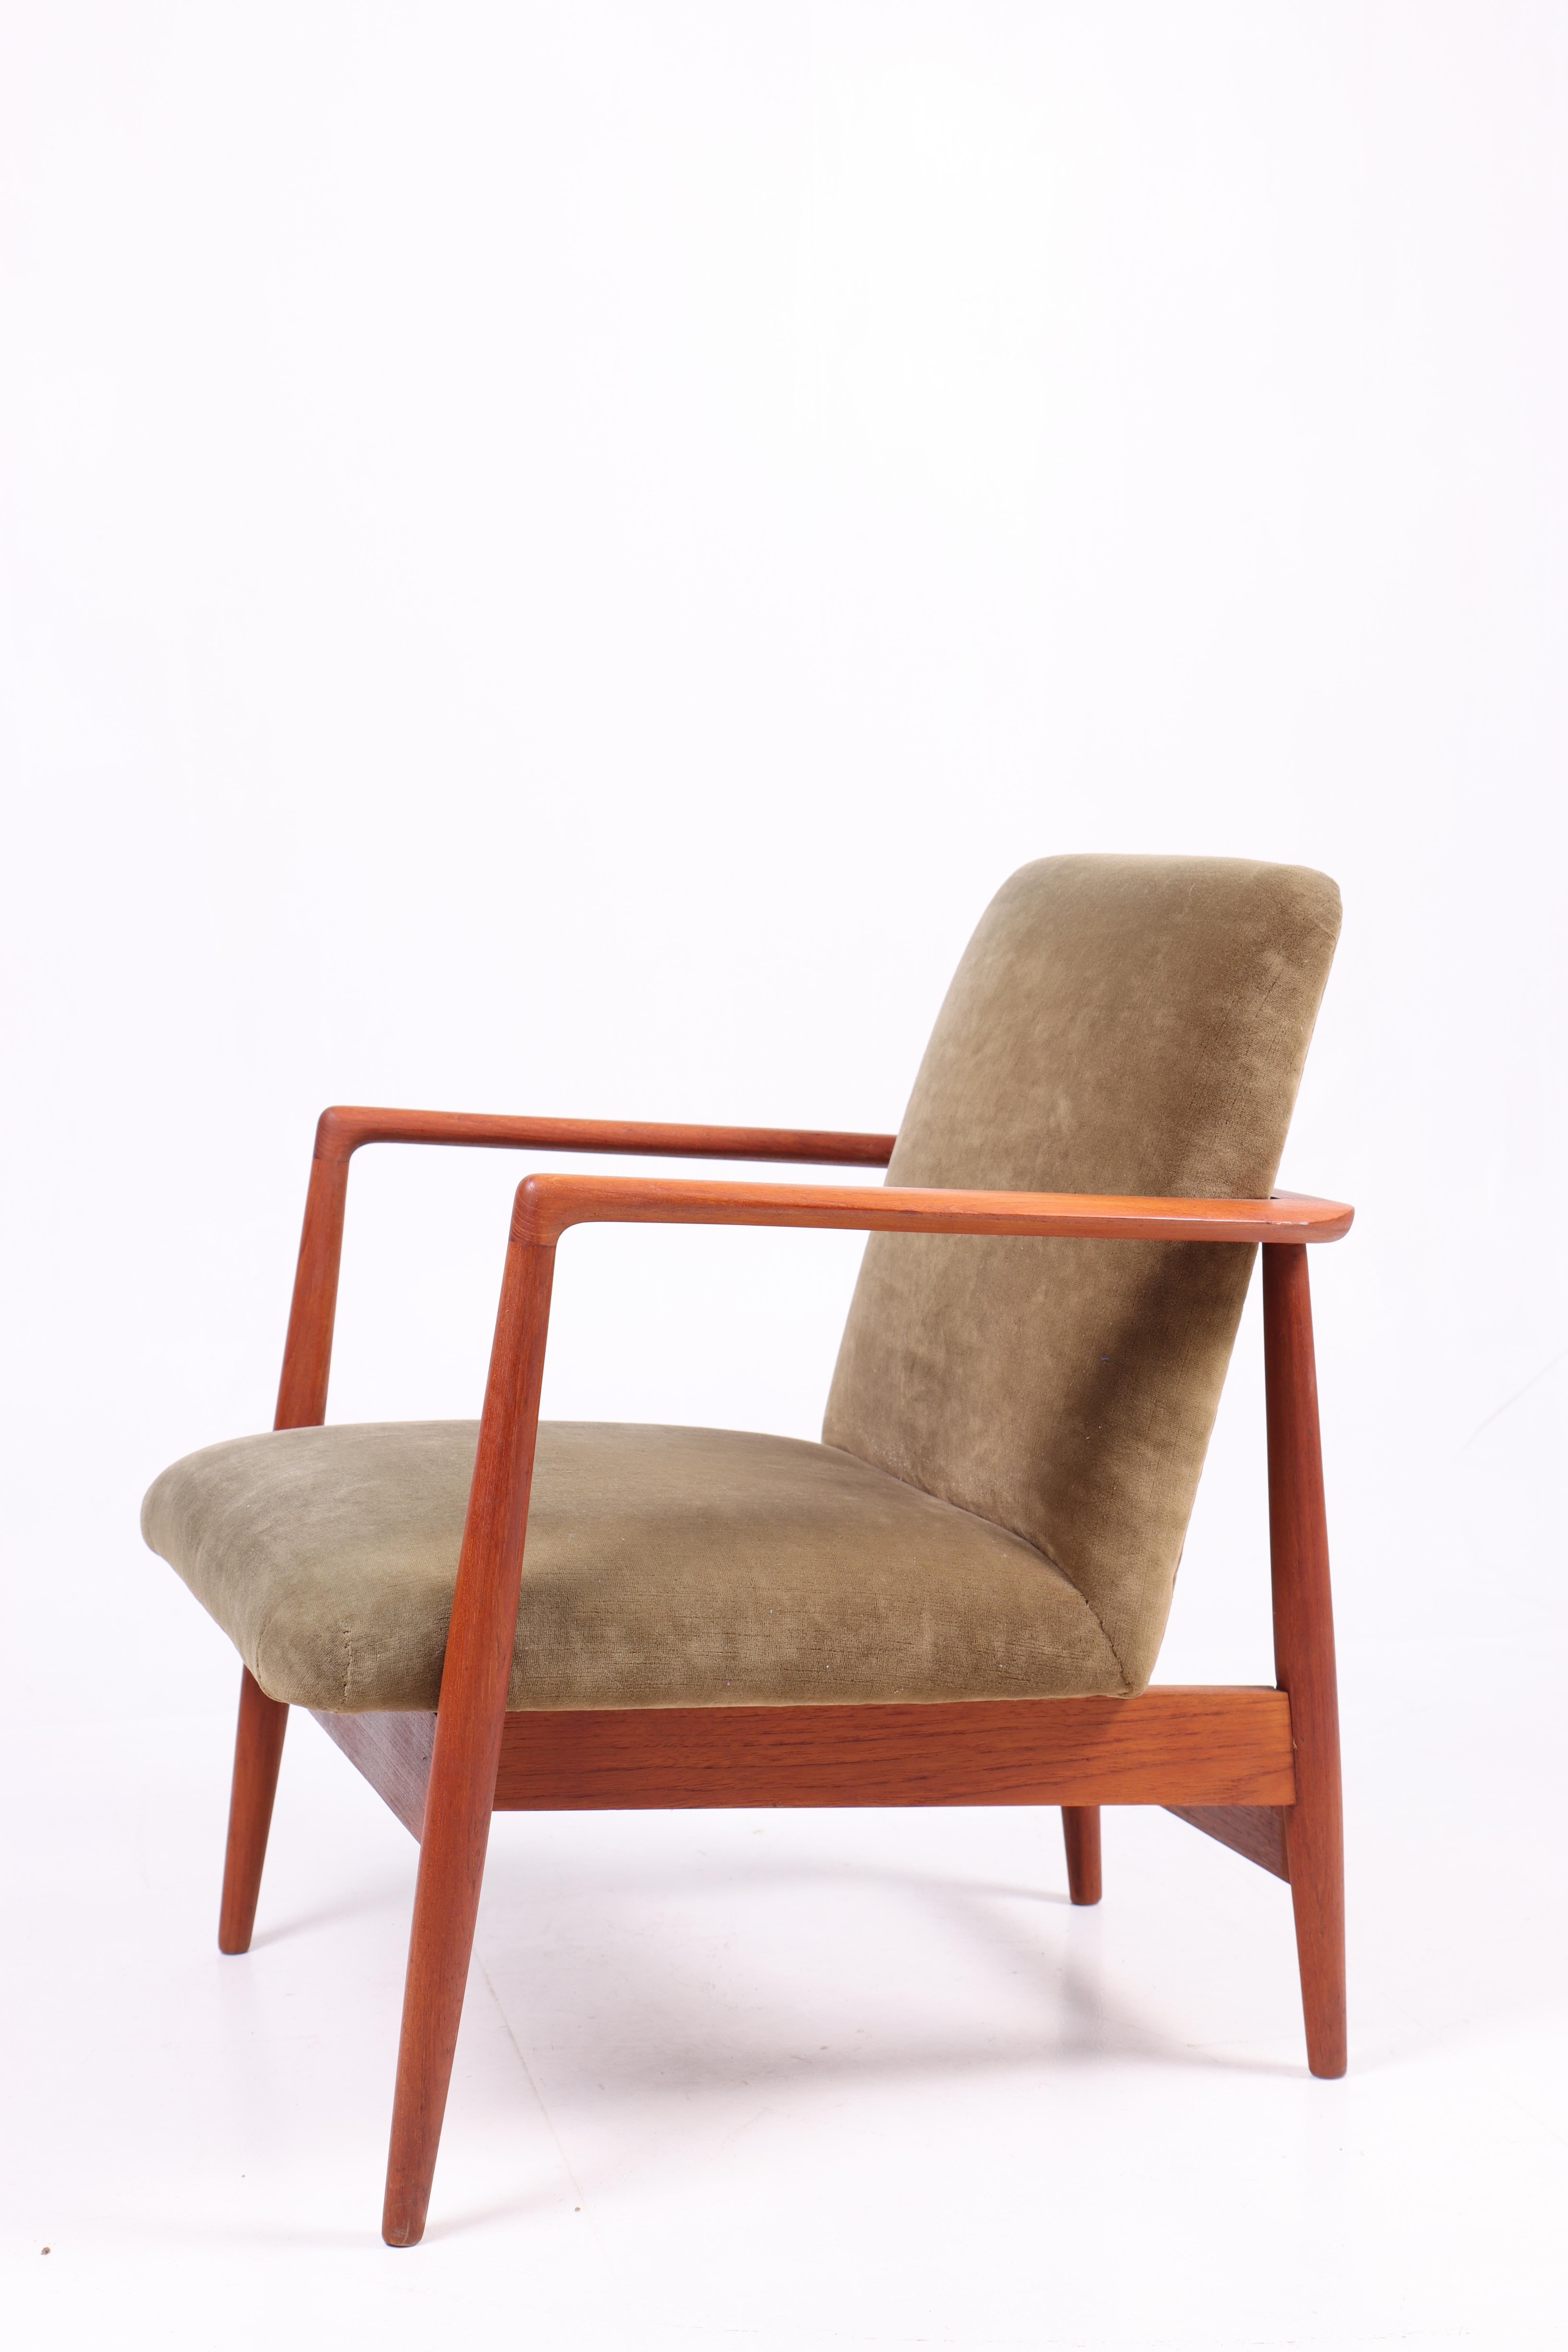 Pair of Midcentury Lounge Chairs in Teak and Velvet by C.B Hansen, 1950s In Good Condition For Sale In Lejre, DK